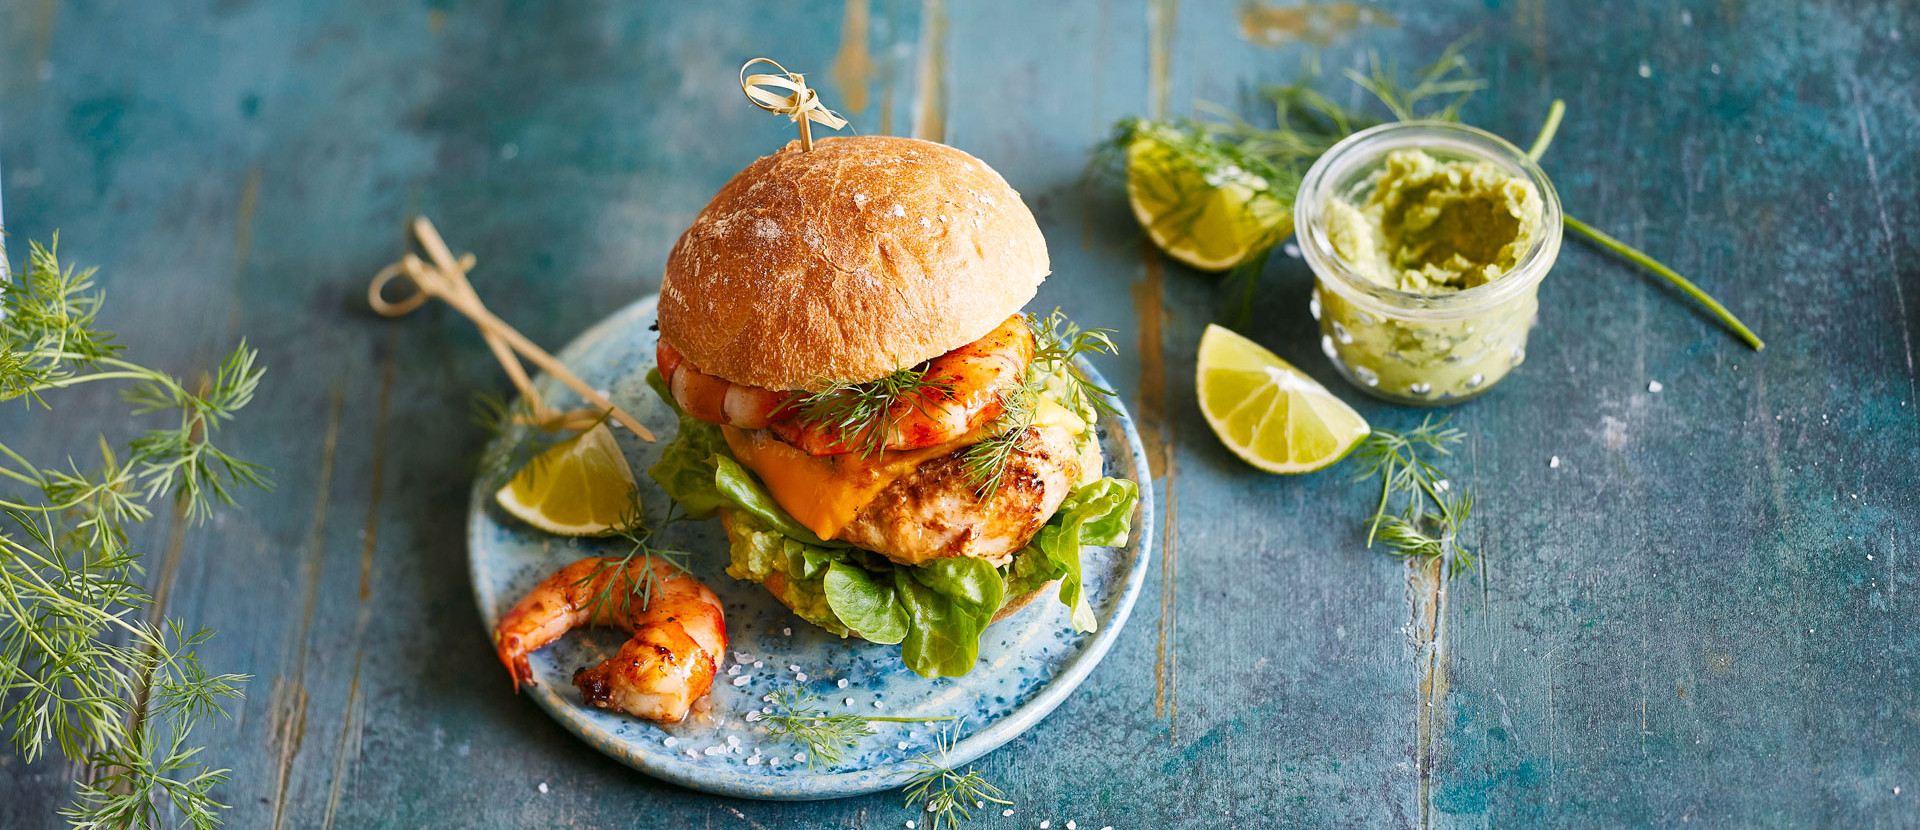 Surf and Turf Burger mit Avocadocreme